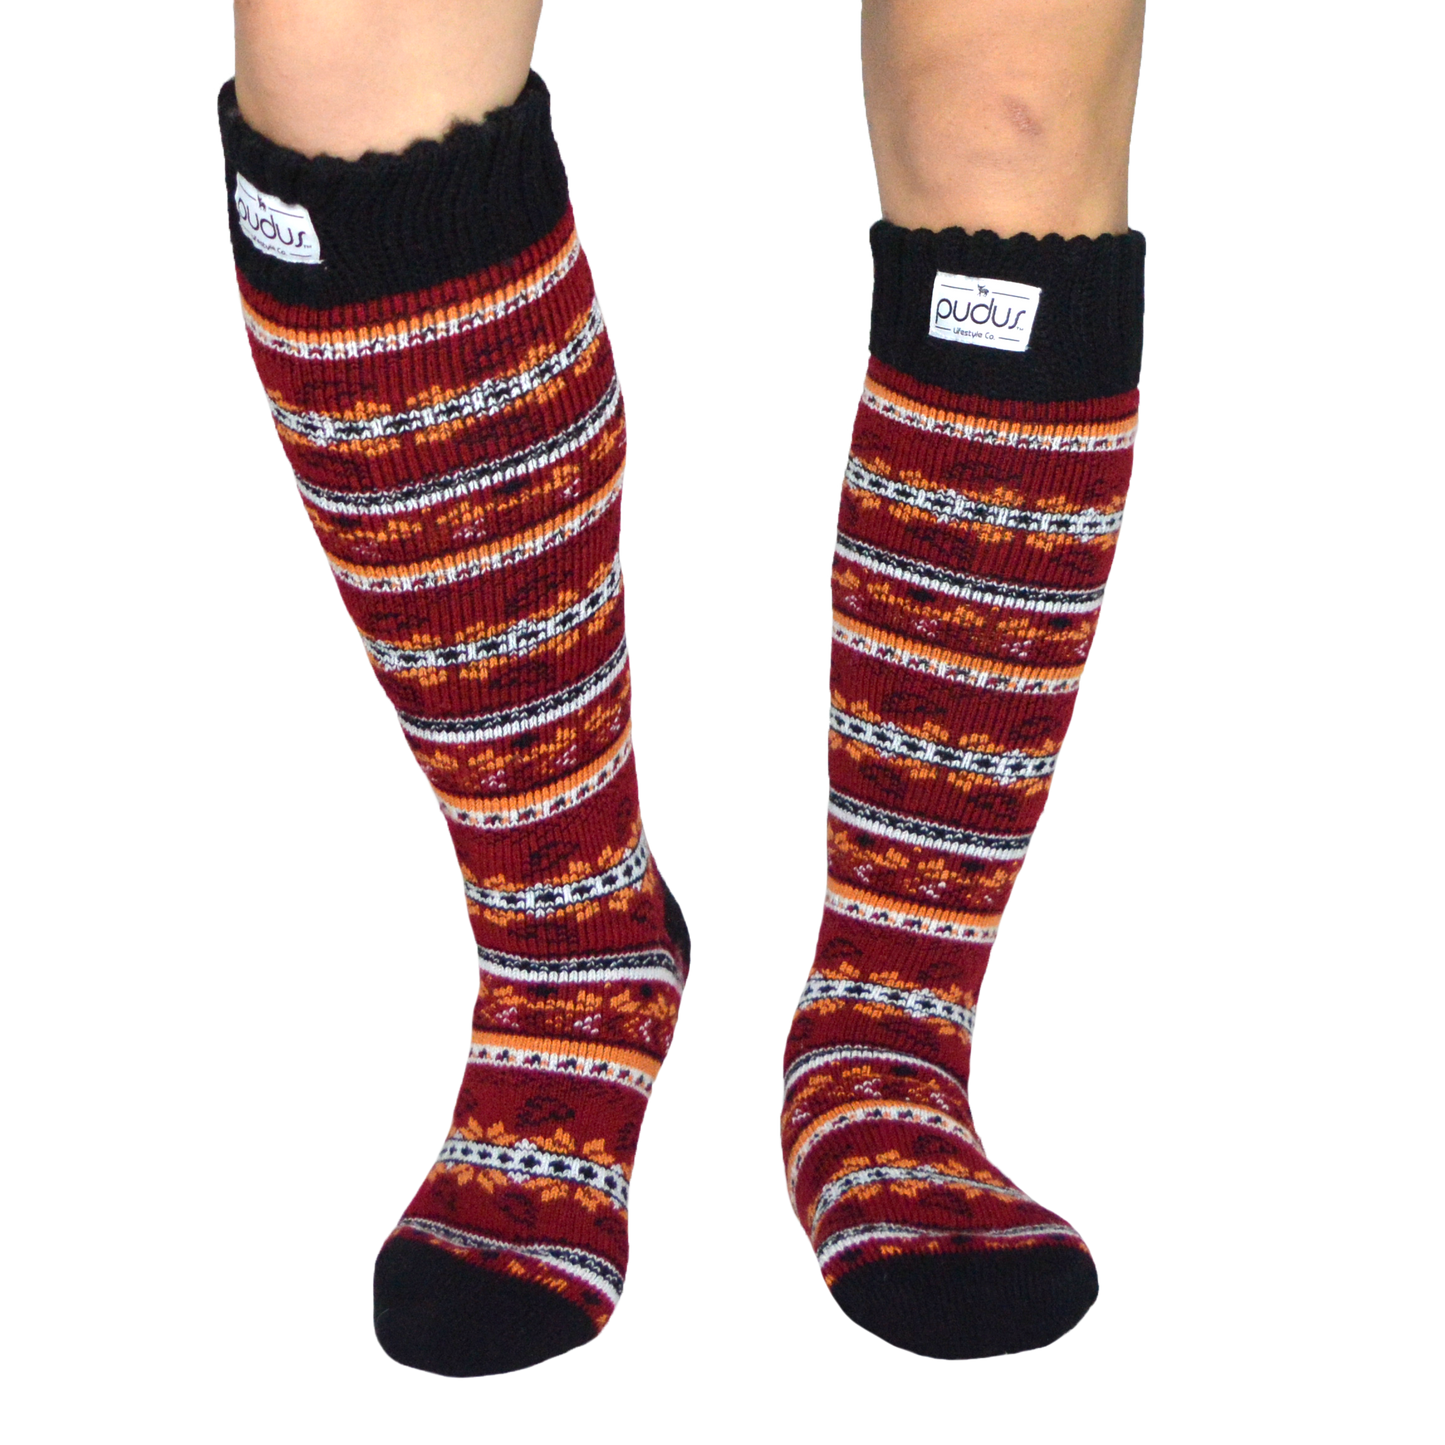 Autumn Red Tall Boot Socks With Fleece-Lining, Knee High Winter Thermal Socks